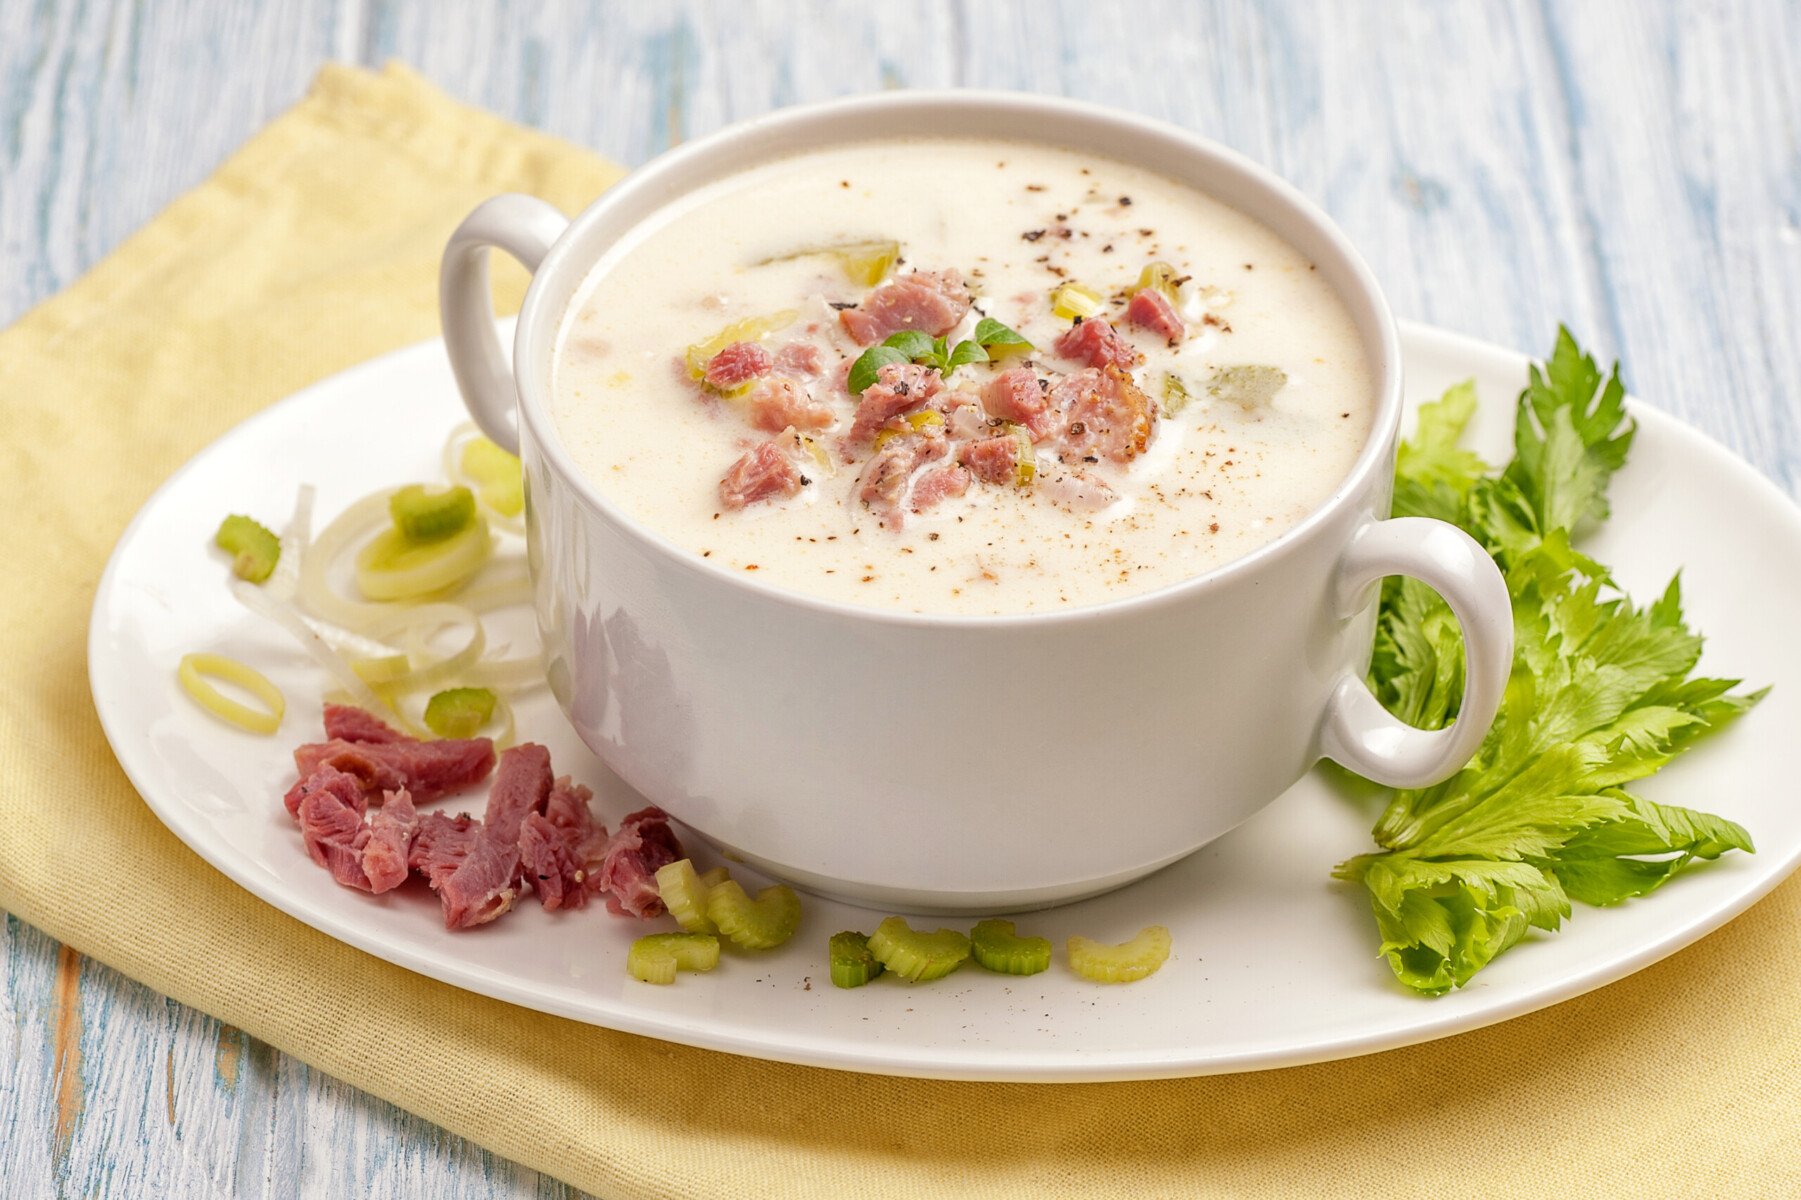 bowl of creamy reuben soup, garnished with green onion, sauerkraut and corned beef